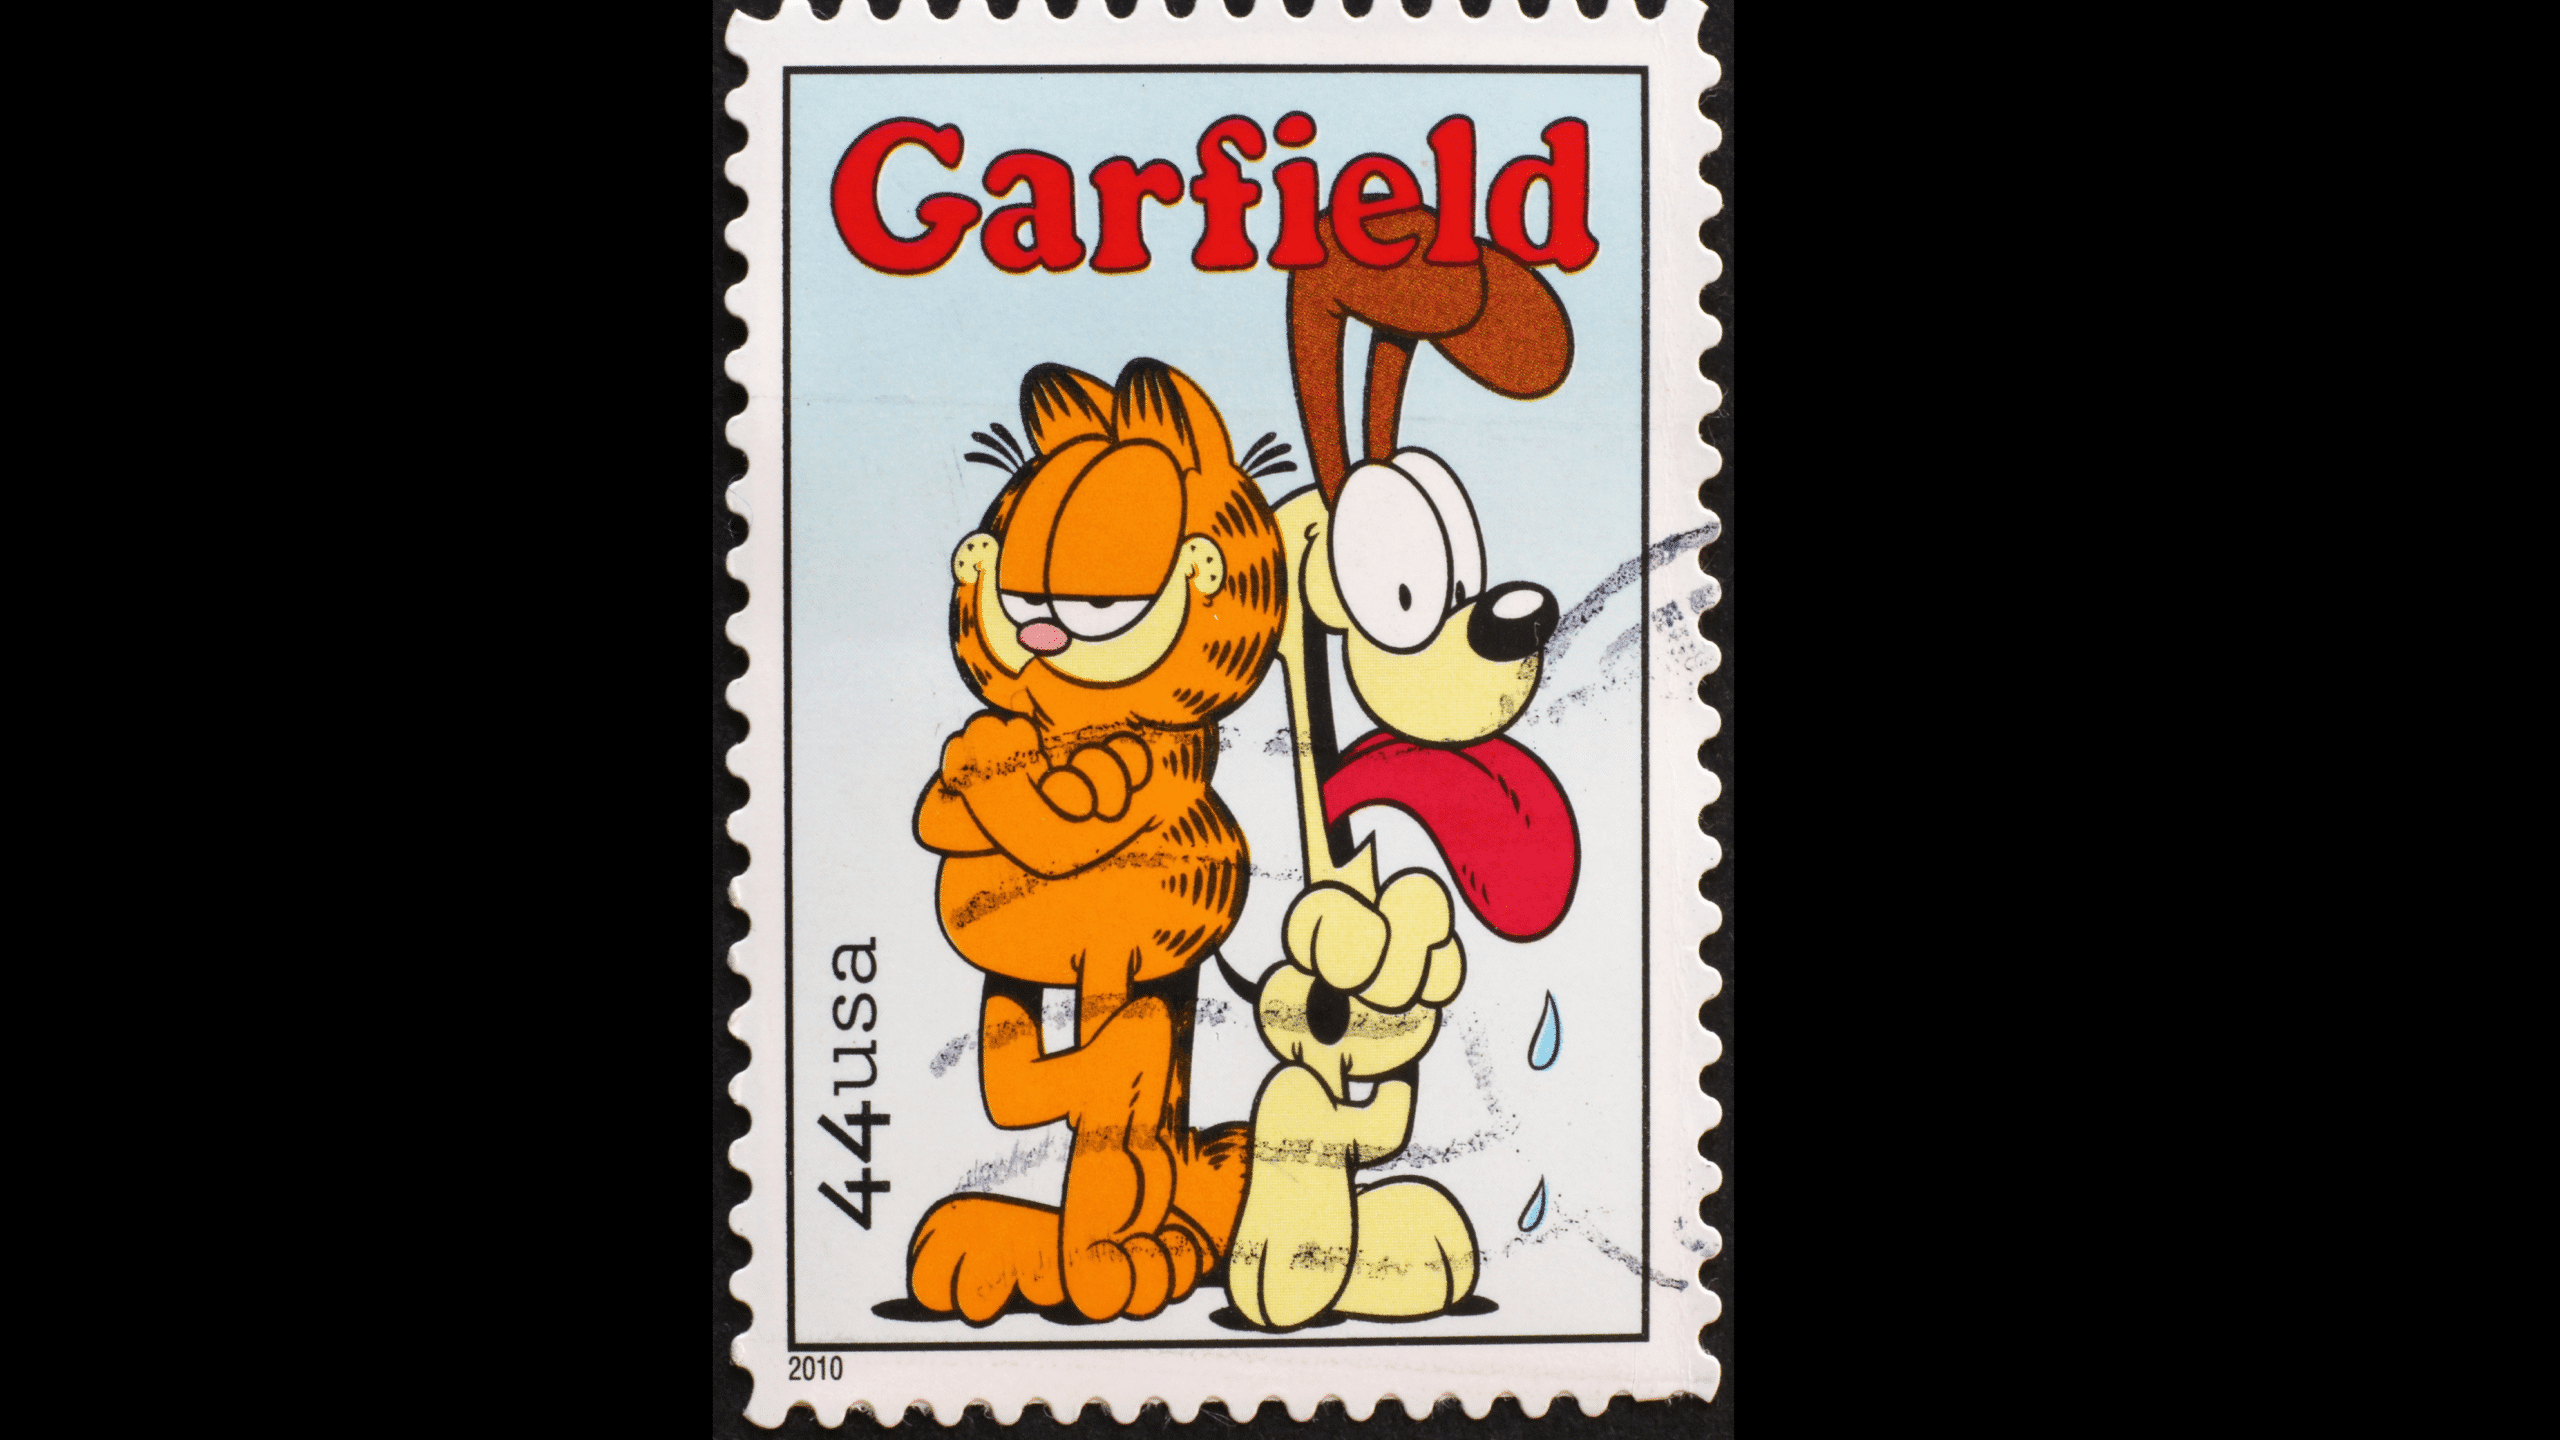 USA stamp with Garfield and Odie on it